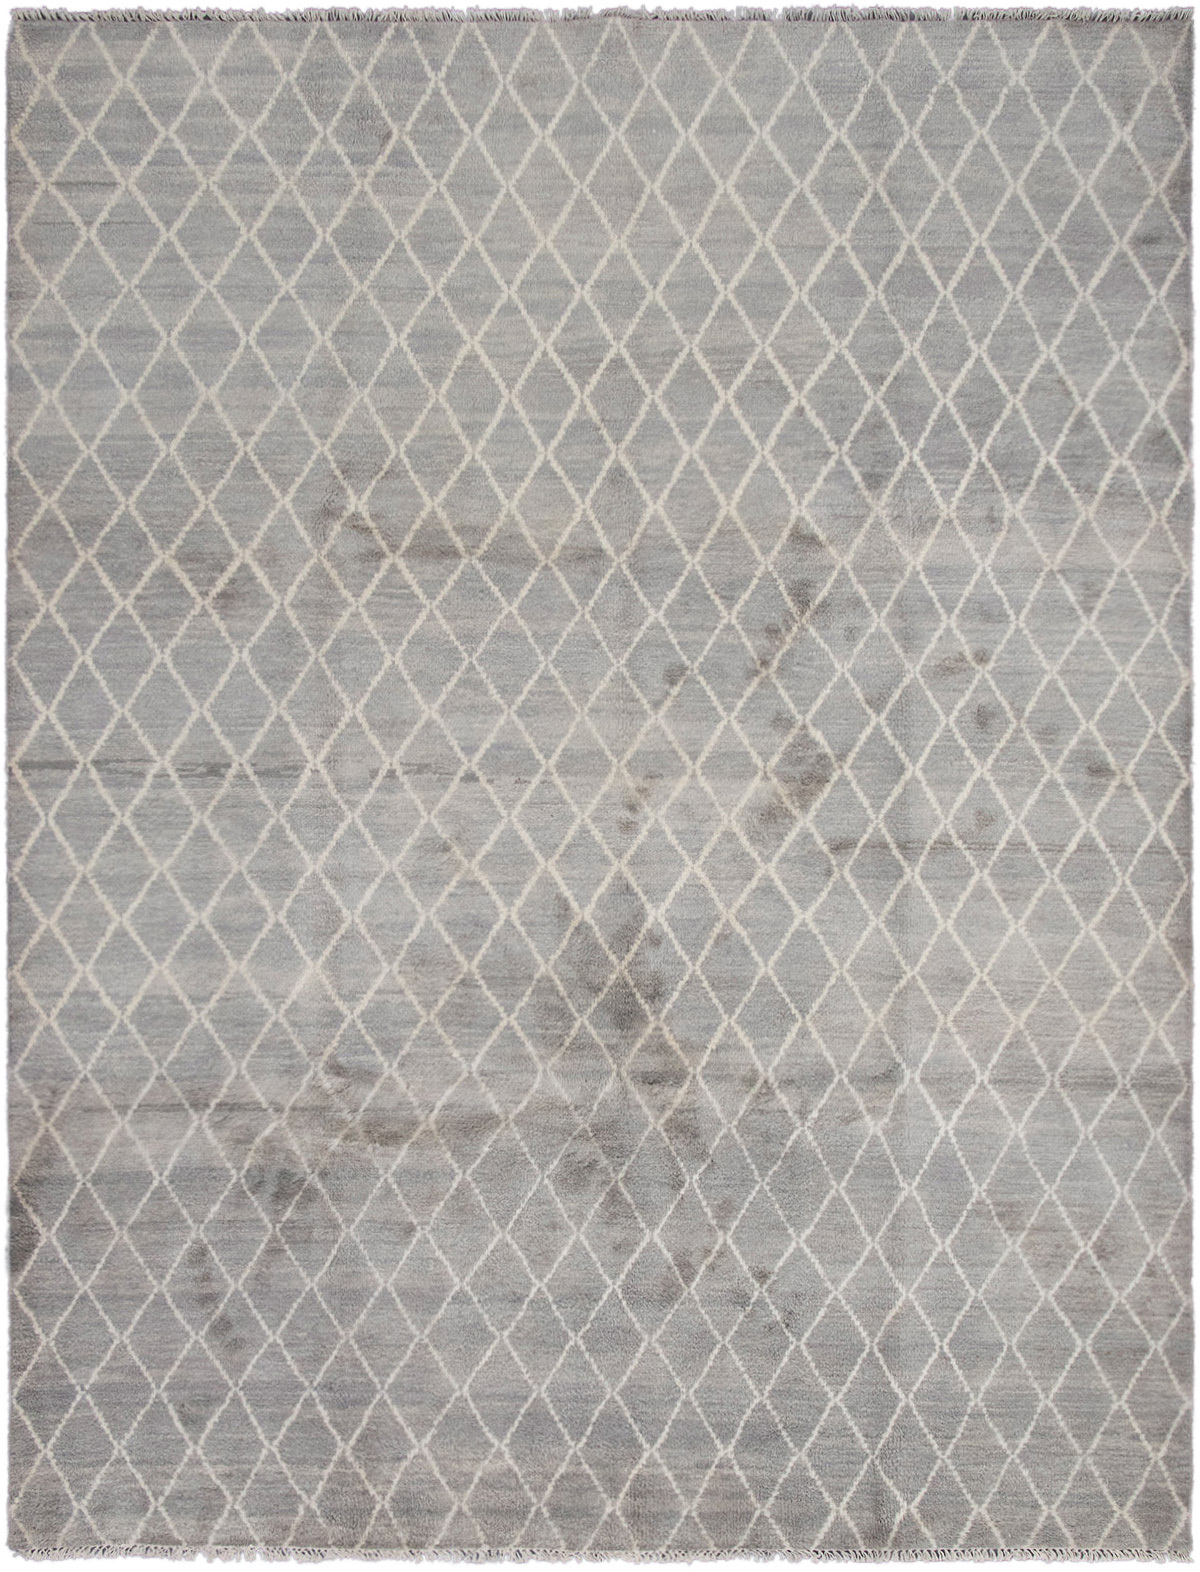 Hand-knotted Arlequin Grey Wool Rug 9'2" x 11'10" Size: 9'2" x 11'10"  